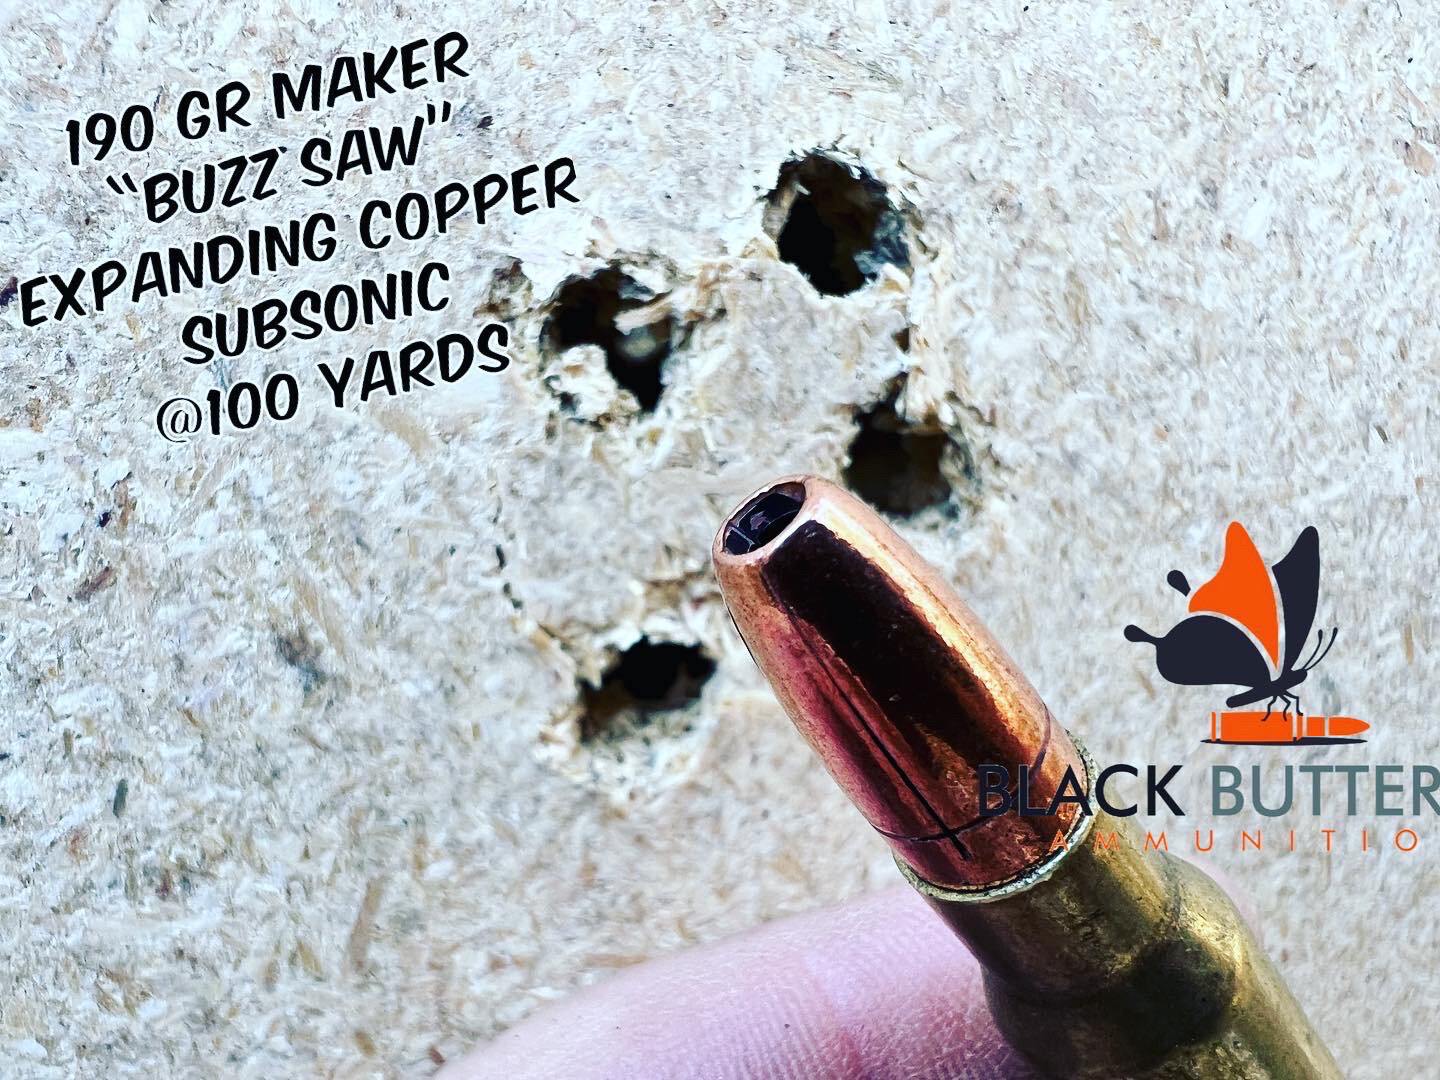 Black Butterfly Ammunition, .308/7.62x51mm, 190 gr., 5 Rounds, SUBSONIC MAKER EXPANDING COPPER &quot;BUZZSAW&quot; (1070 AMV) 1:10 OR FASTER TWIST, SAMPLE PACK